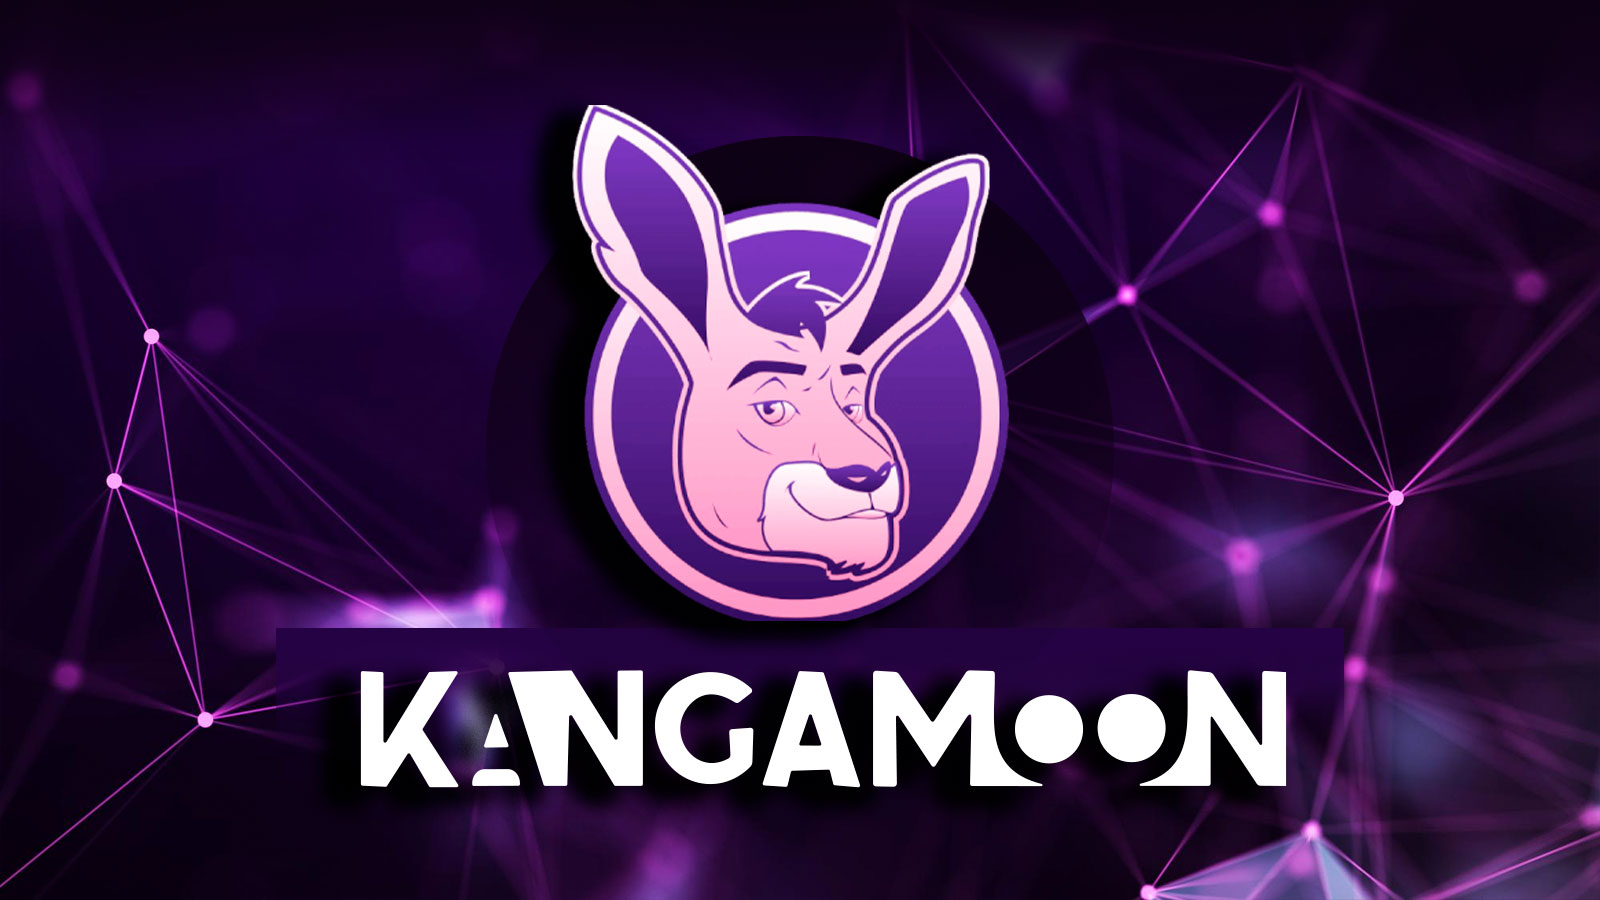 Kangamoon (KANG) Pre-Sale Might be In Spotlight in Q4, 2023 while Ethereum (ETH) and Shiba Inu (SHIB) Communities Remain Optimistic